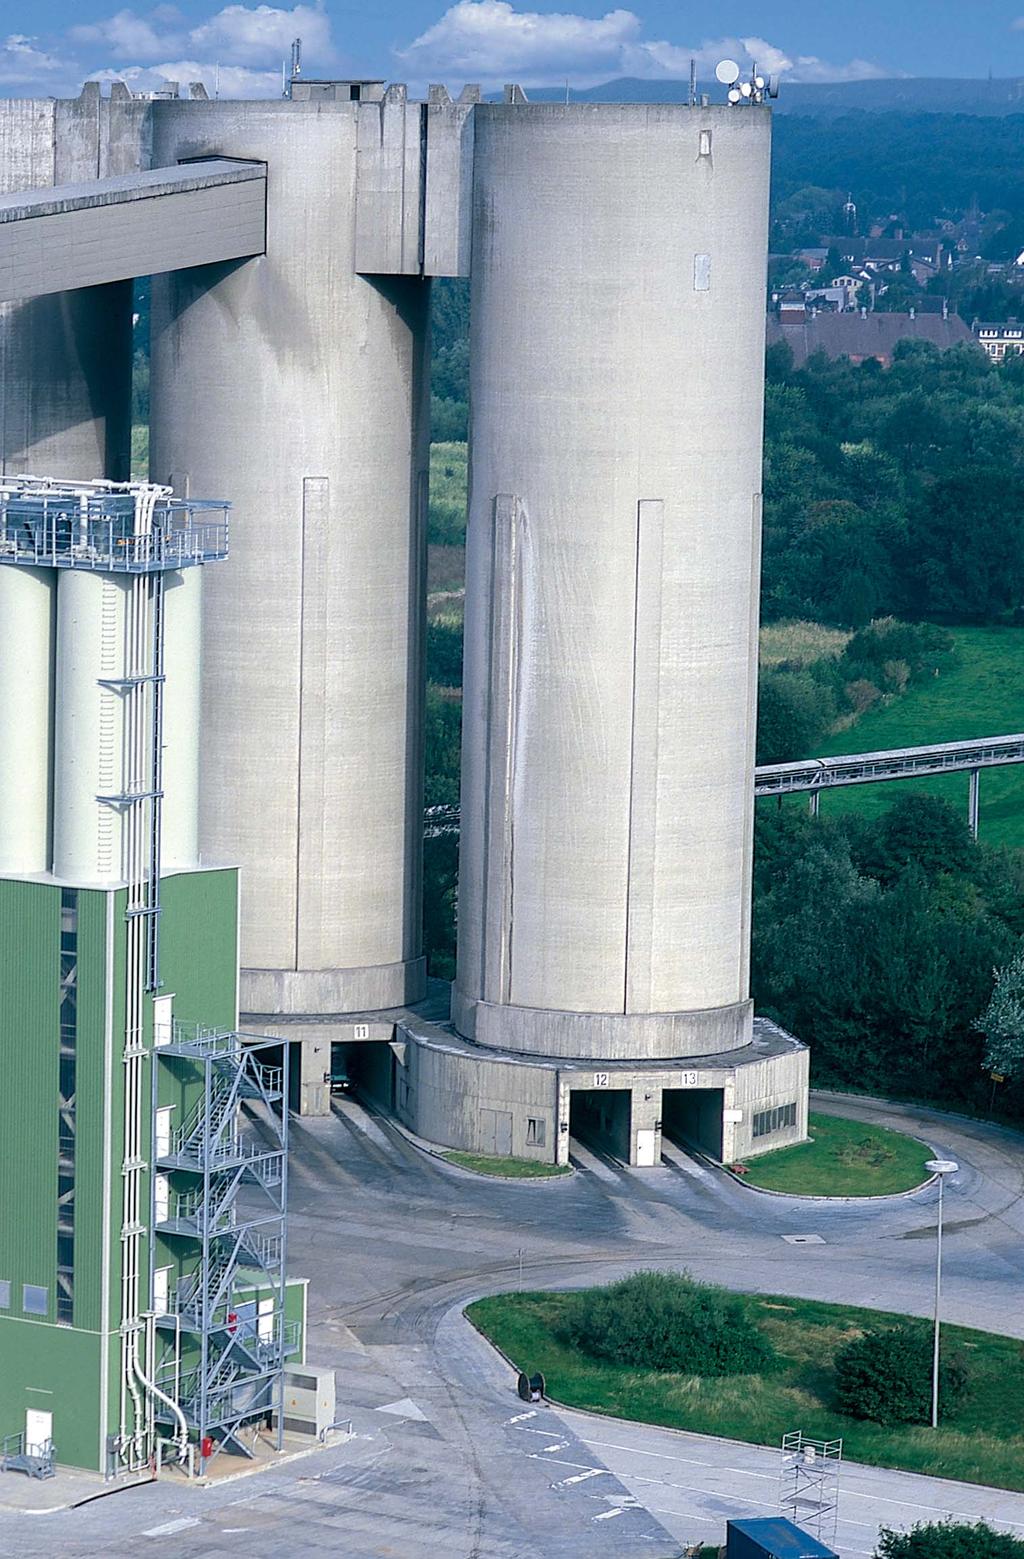 Information silos and